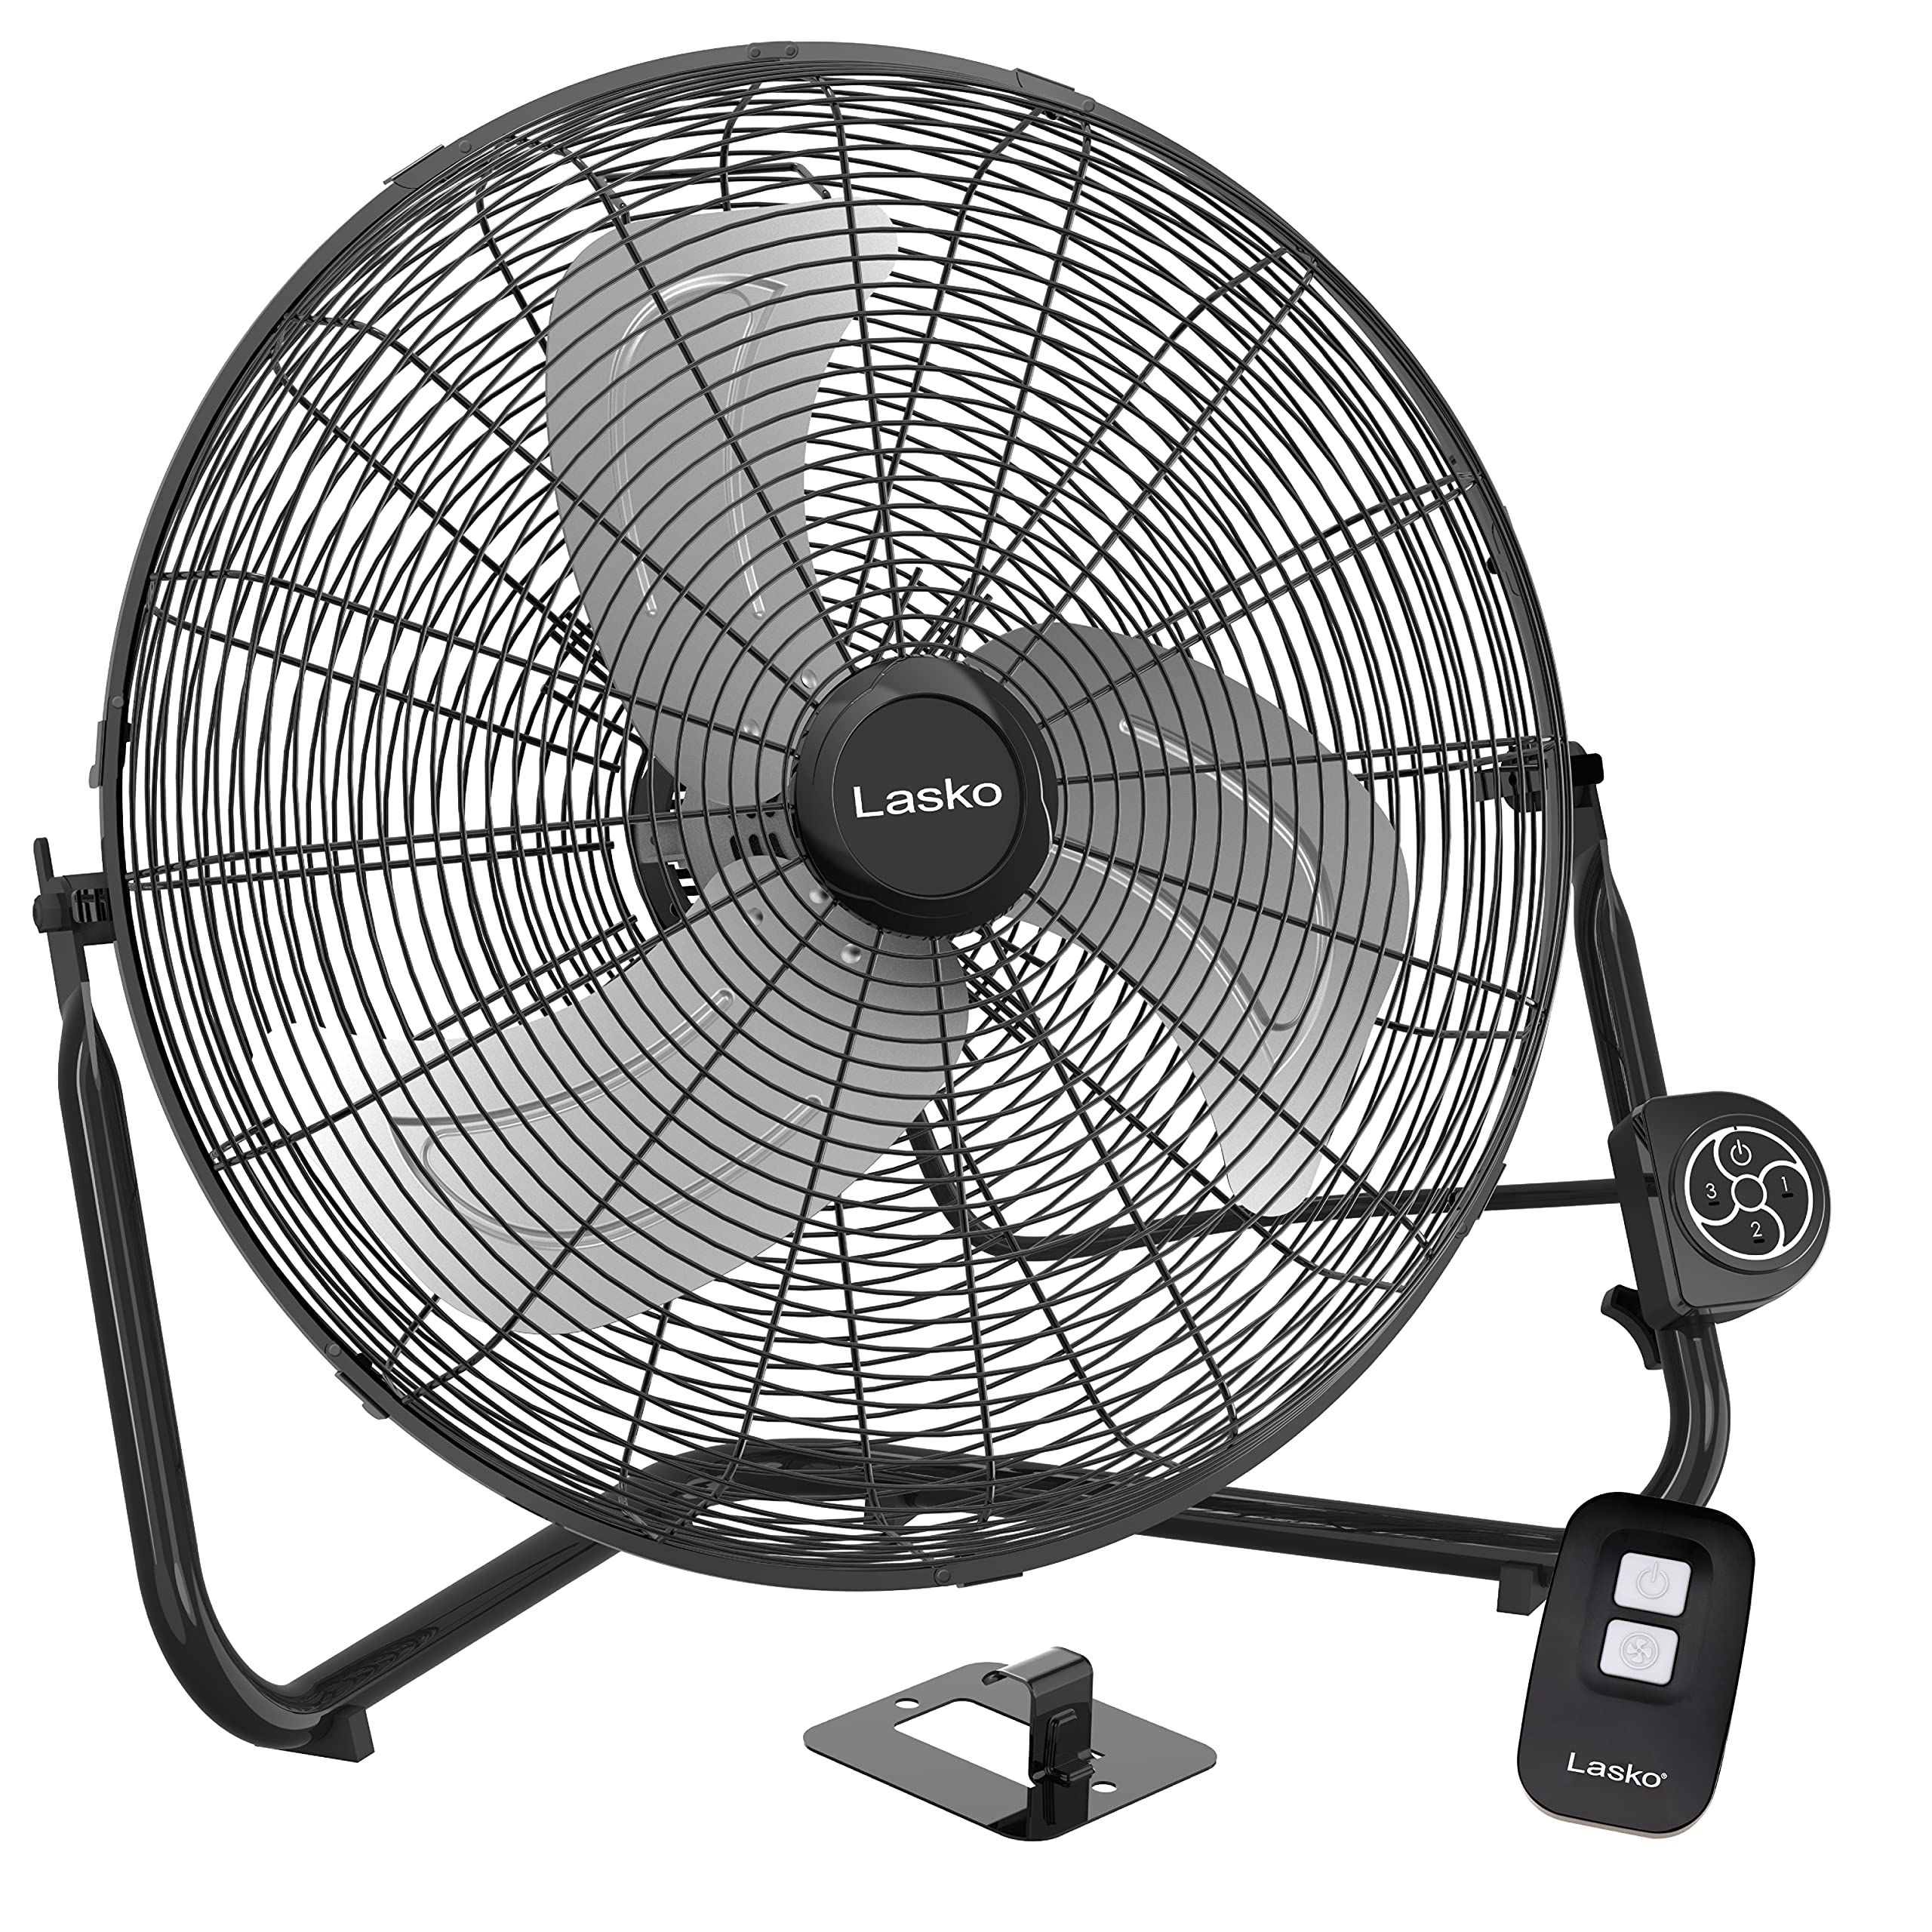 Lasko High Velocity Fan with QuickMount for Floor or Wa...